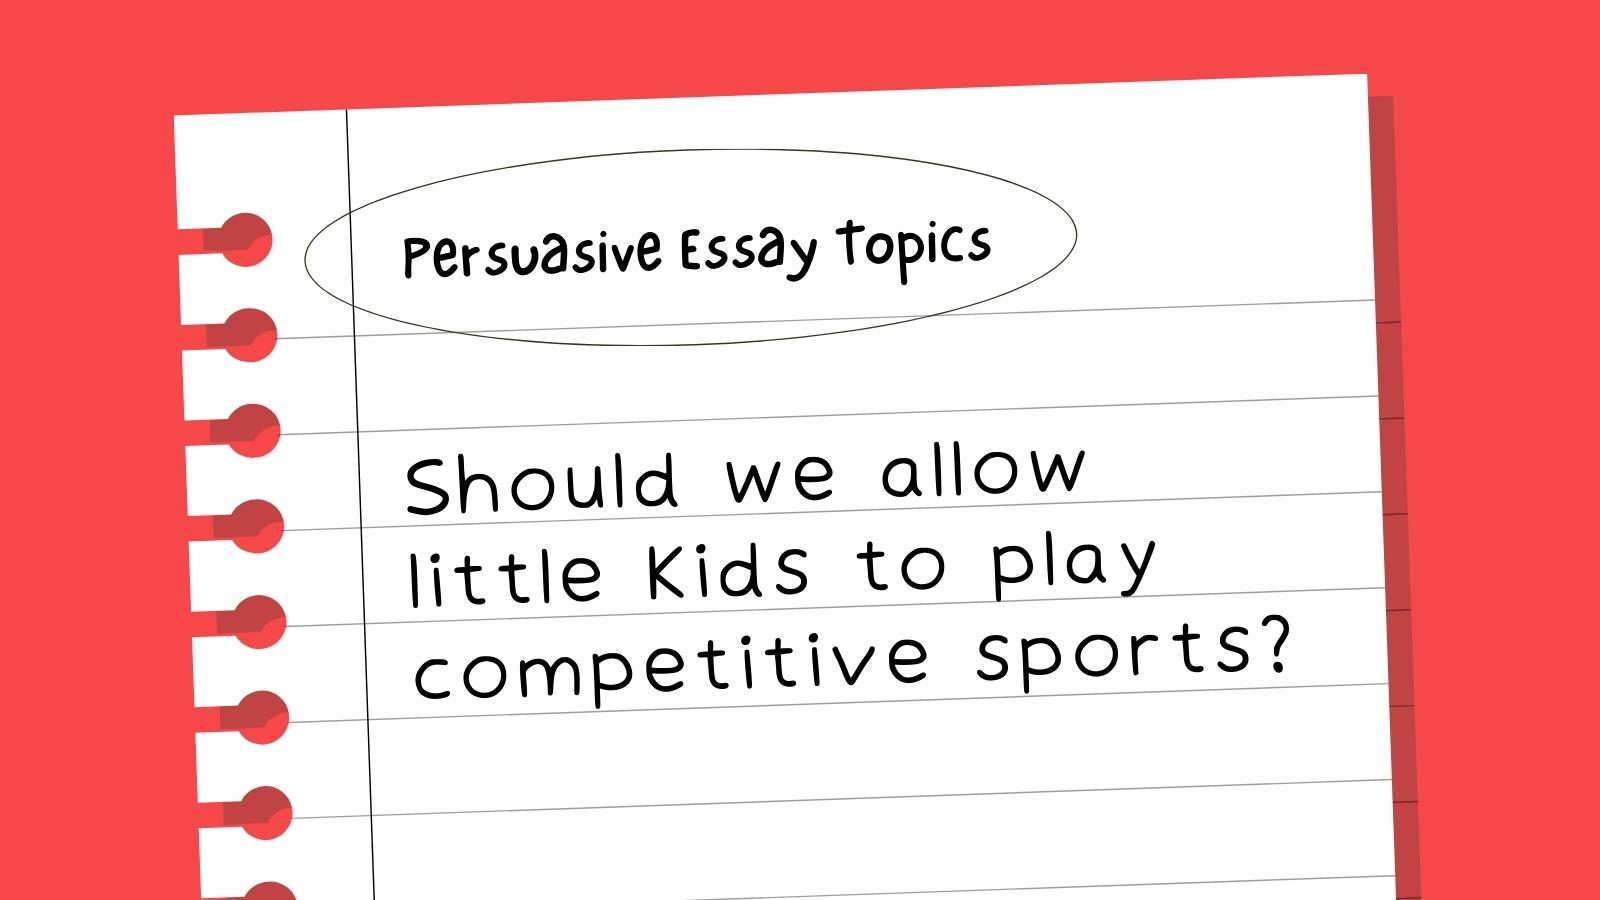 Persuasive Essay Topics: Should we allow little kids to play competitive sports?